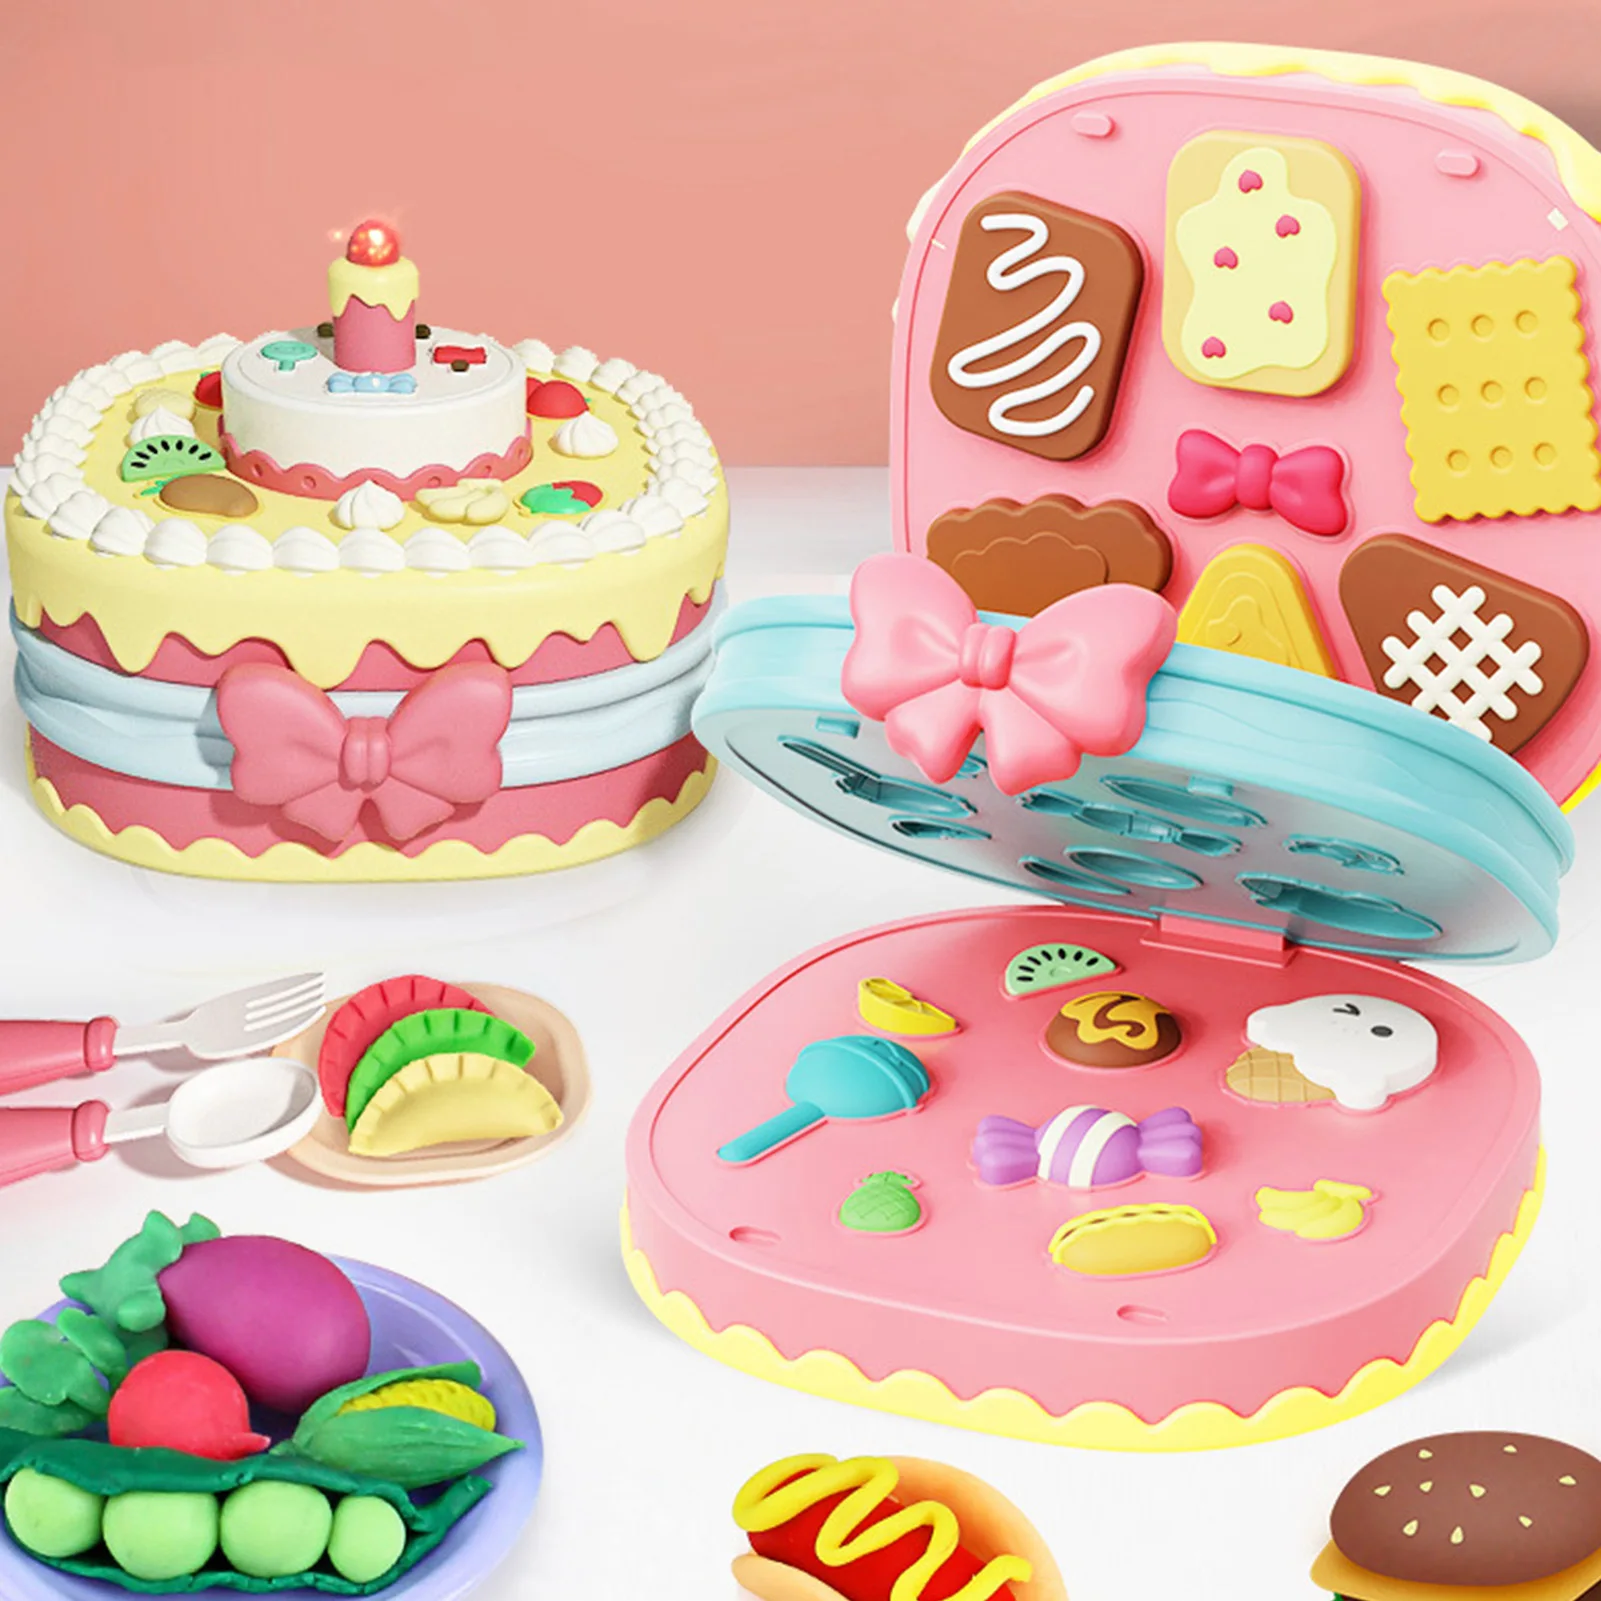 

Color Dough Clay Toys Birthday Cake Playset with Molds Kitchen Creations Tools Kit for Kids Pretend Chef Play Toy